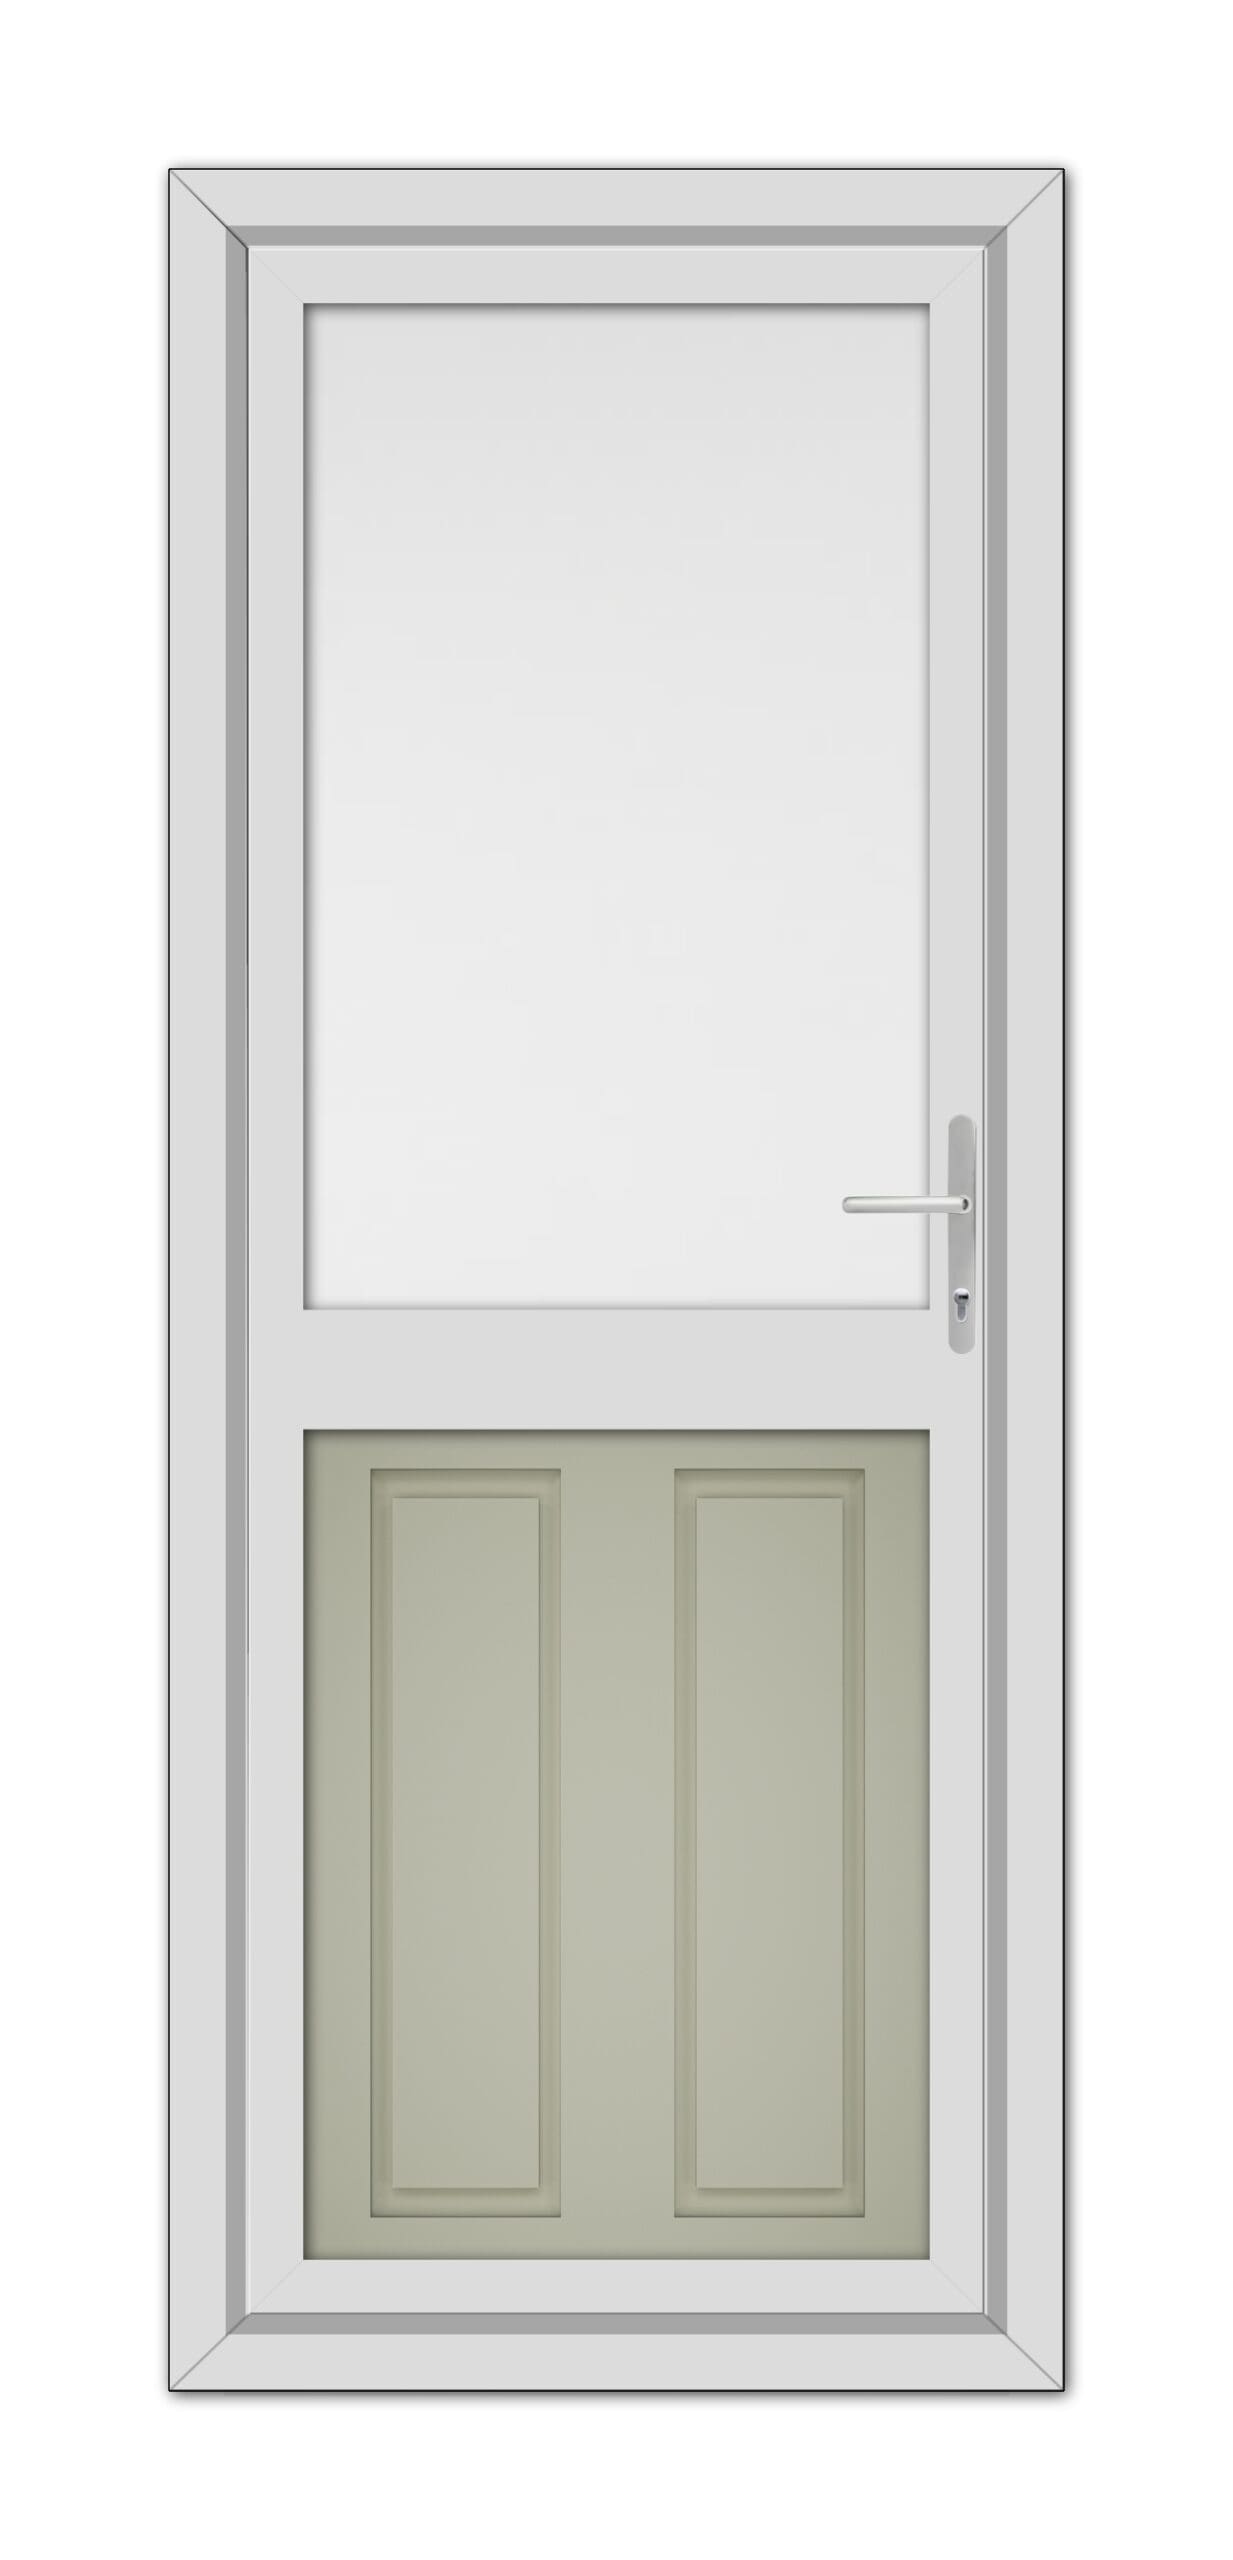 A modern Agate Grey Manor Half uPVC Back Door with a large window on the top and two frosted glass panels on the bottom, featuring a metallic handle on the right side.